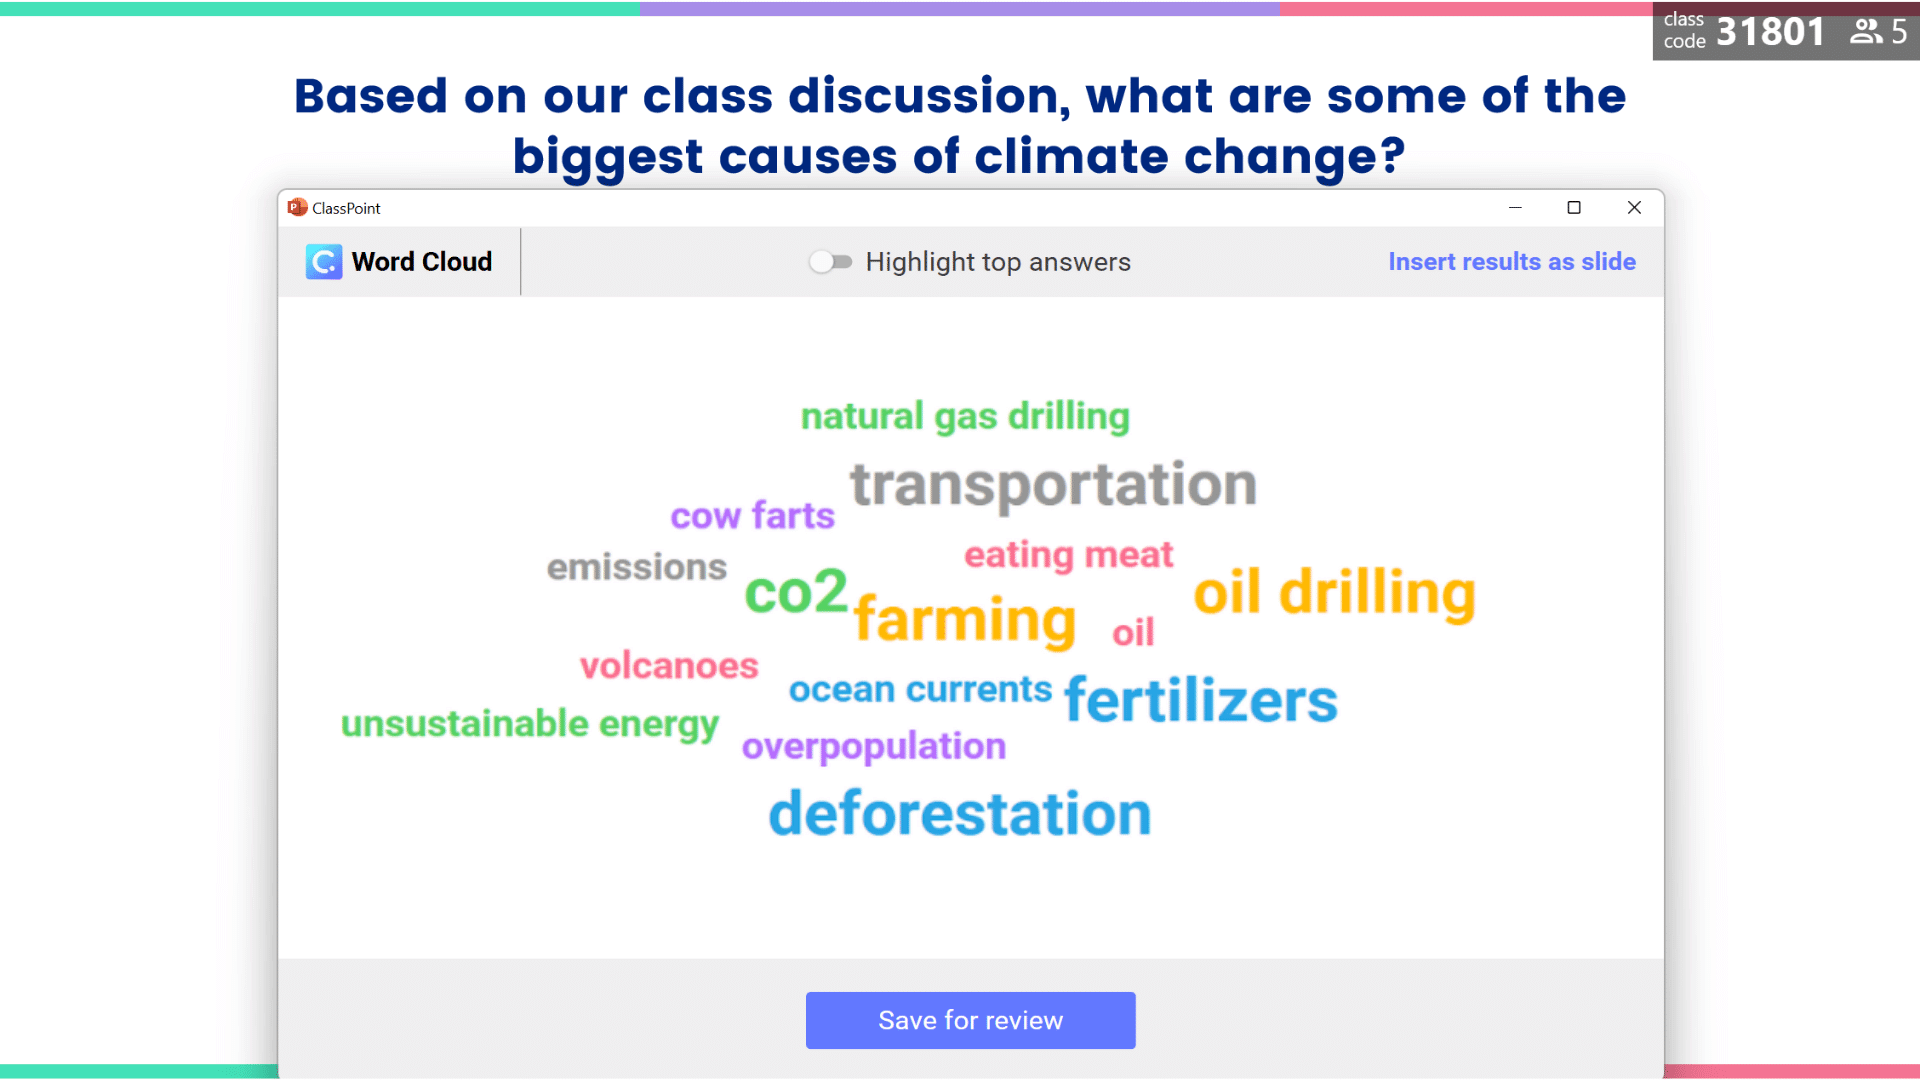 Word Cloud activities: What are some causes of climate change?